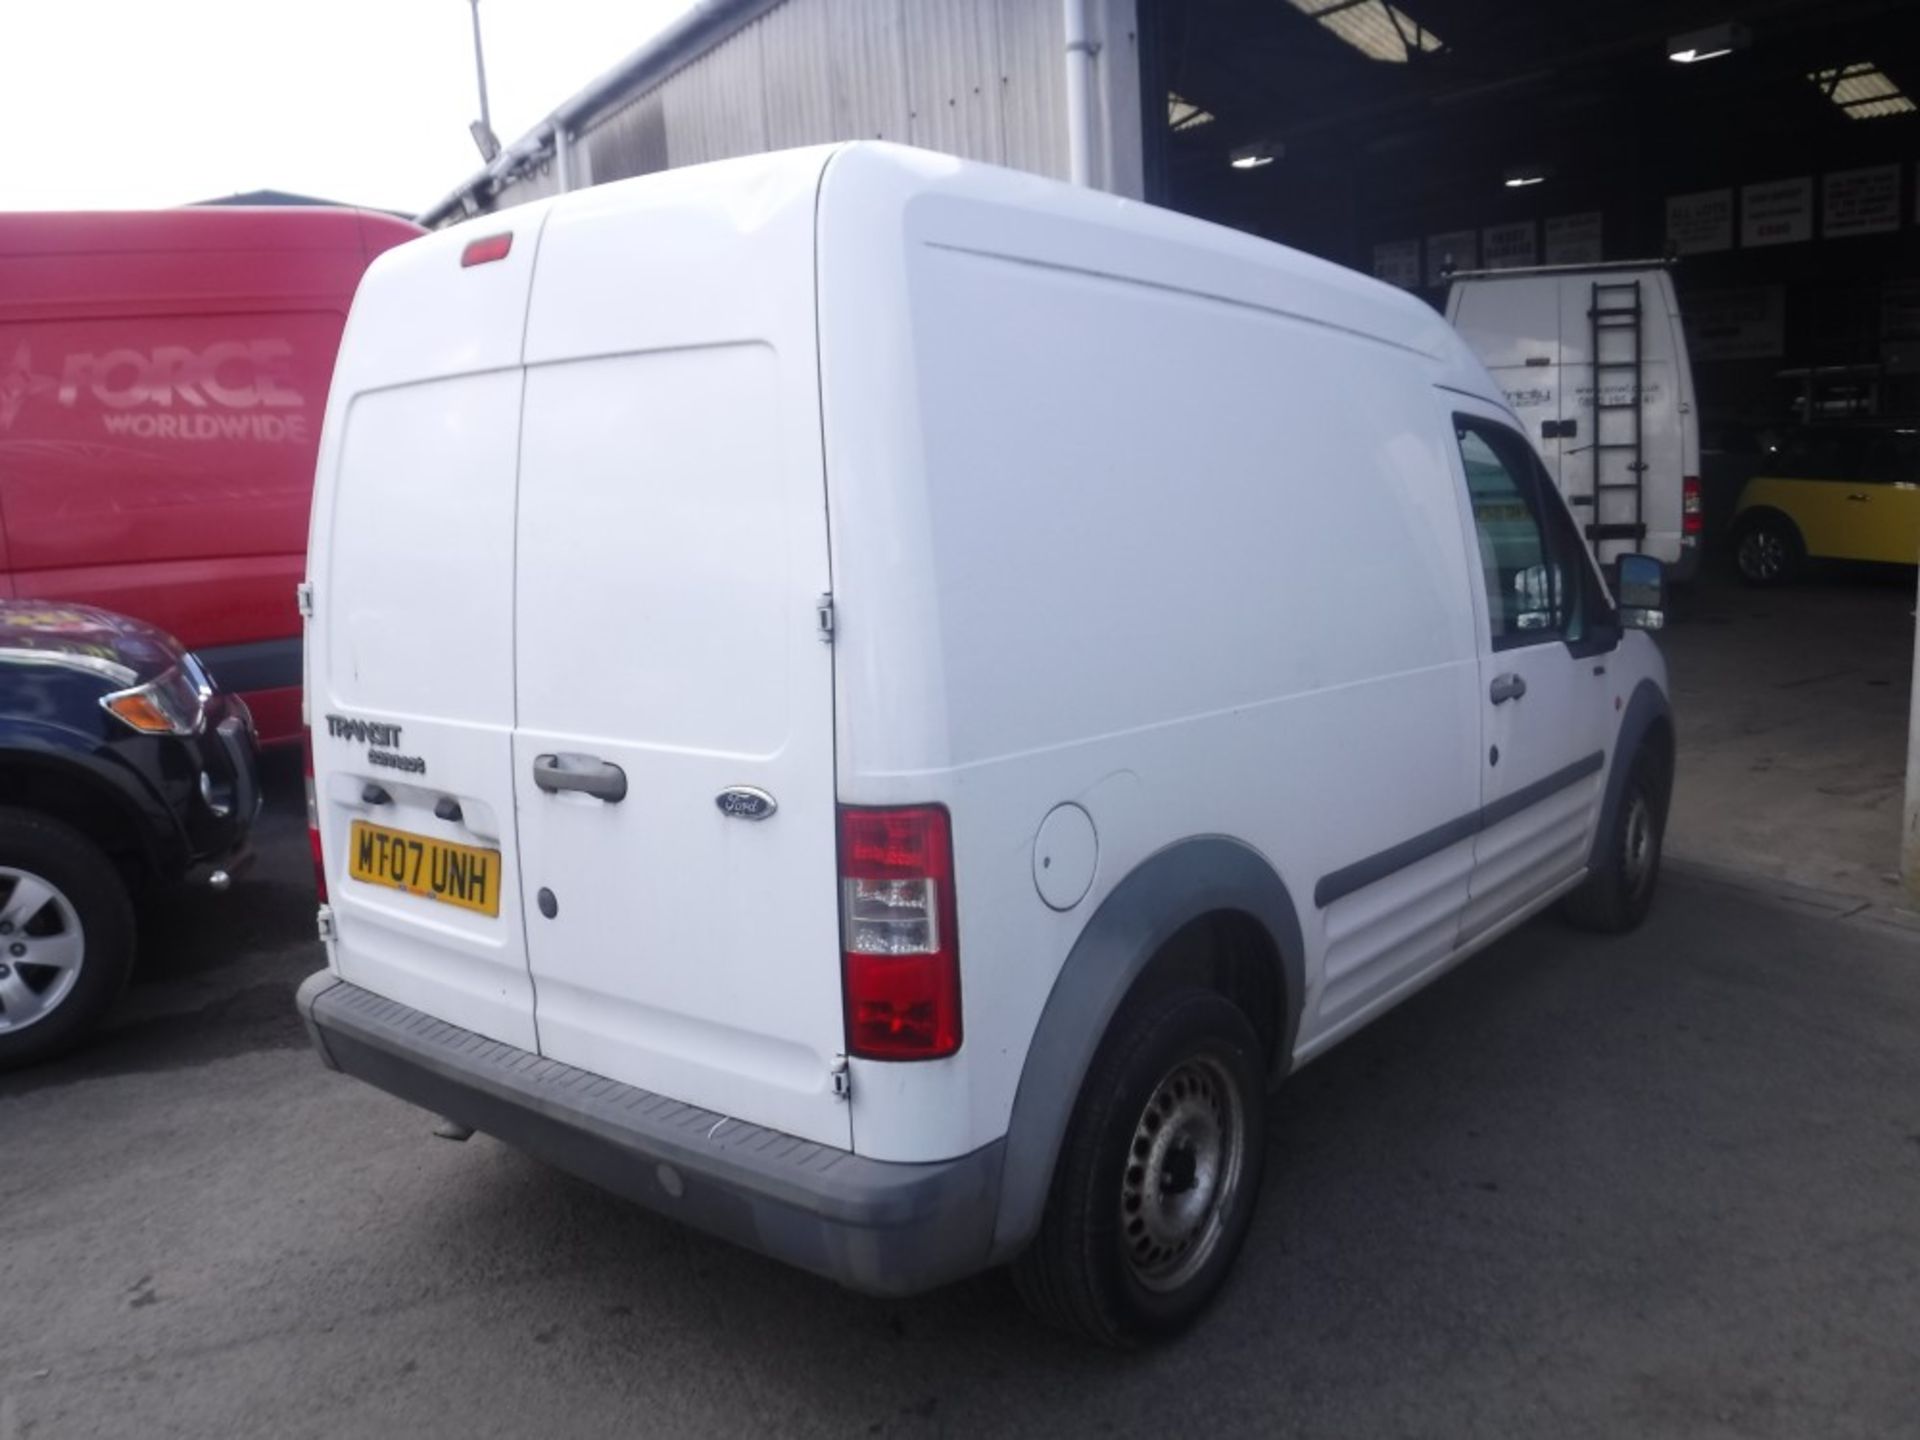 07 reg FORD TRANSIT CONNECT T230 (DIRECT COUNCIL) 1ST REG 07/07, 48359M, V5 HERE, 1 OWNER FROM - Image 4 of 5